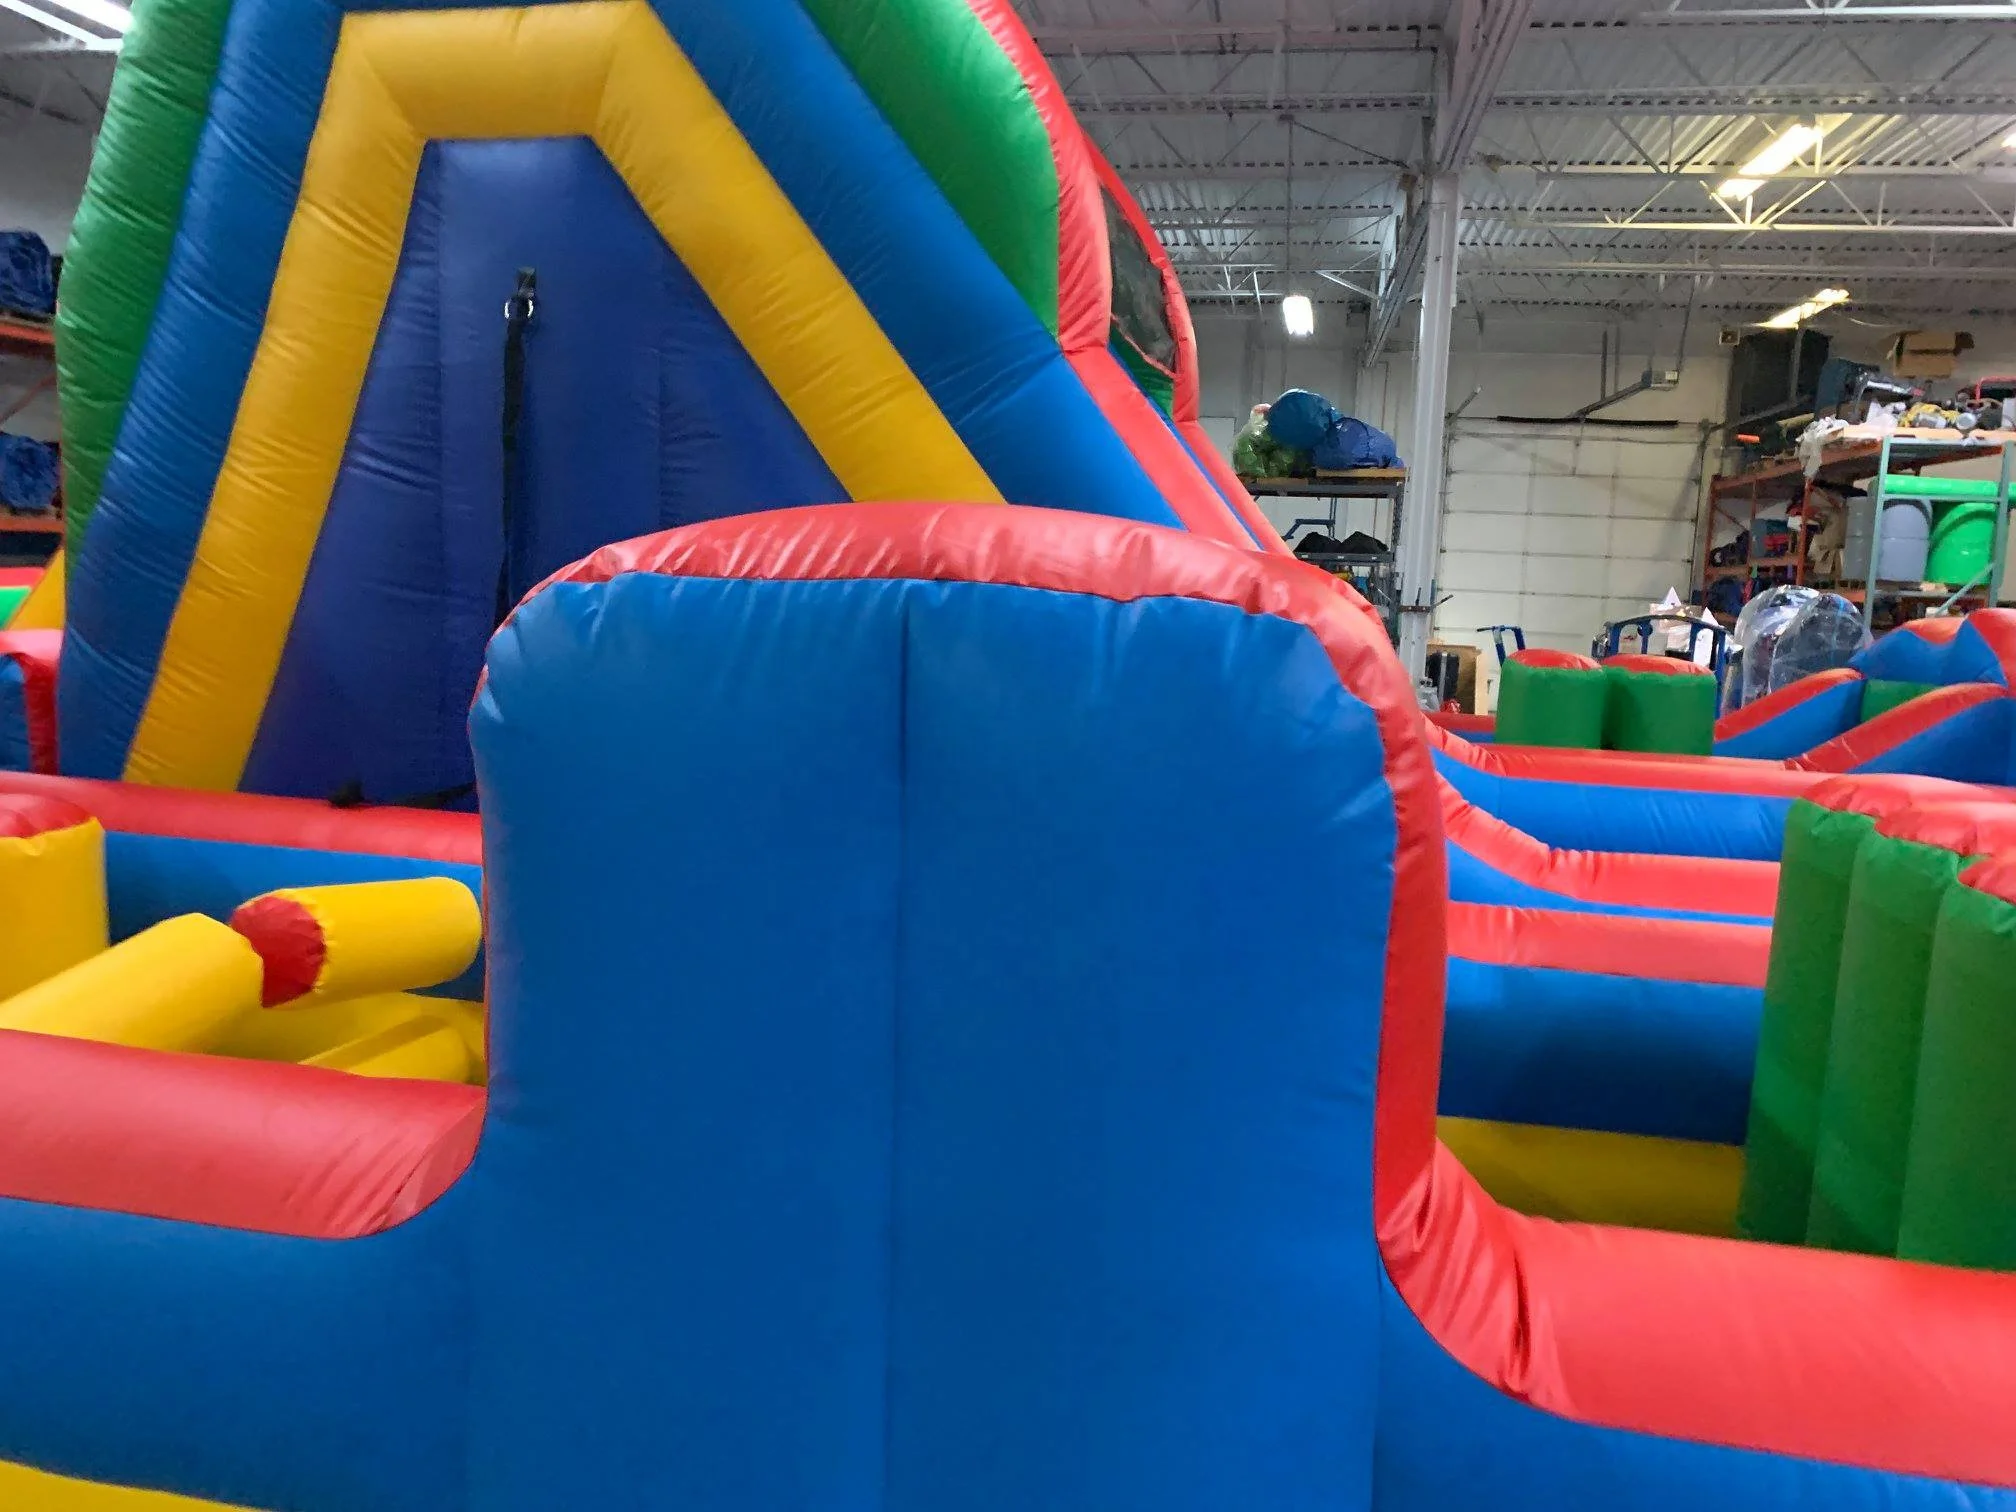 5k  inflatable Run obstacles,inflatable obstacle course for party rental